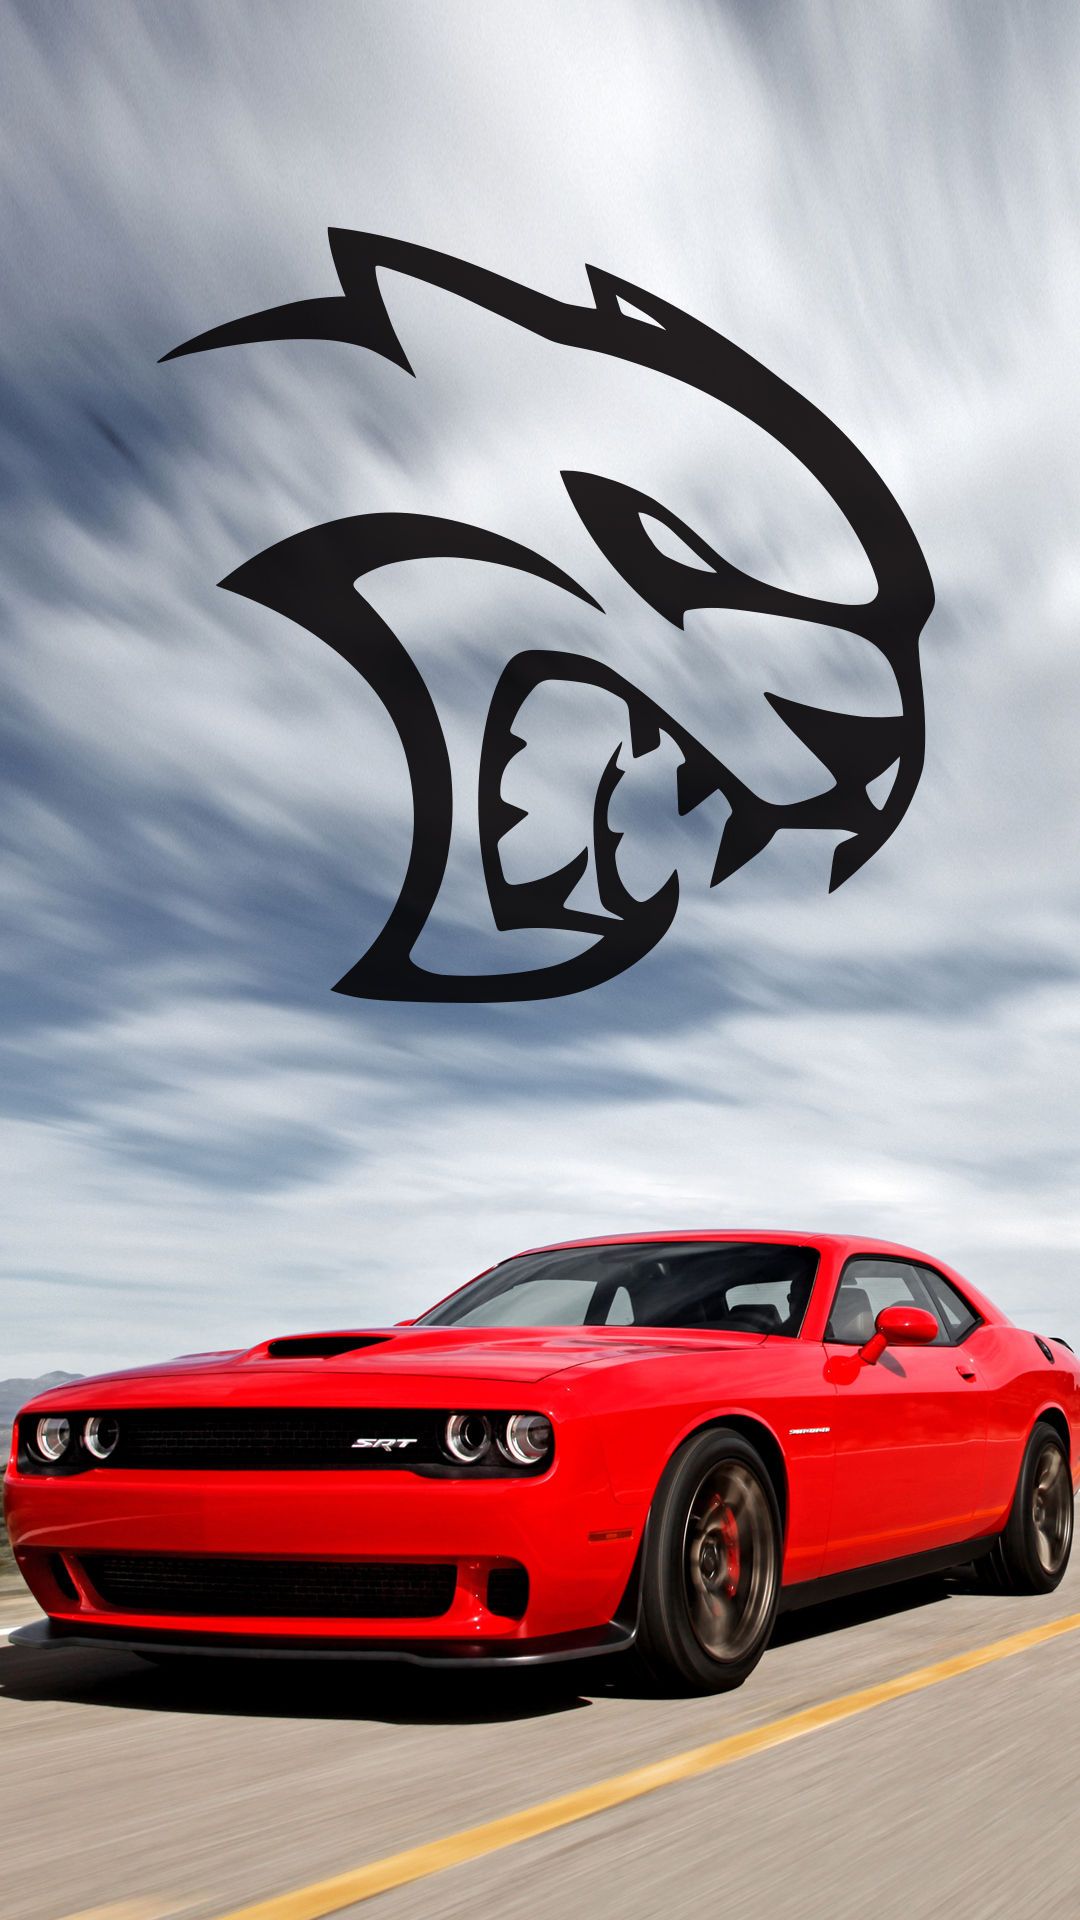 Hellcat Logo Wallpaper Image Collections Of